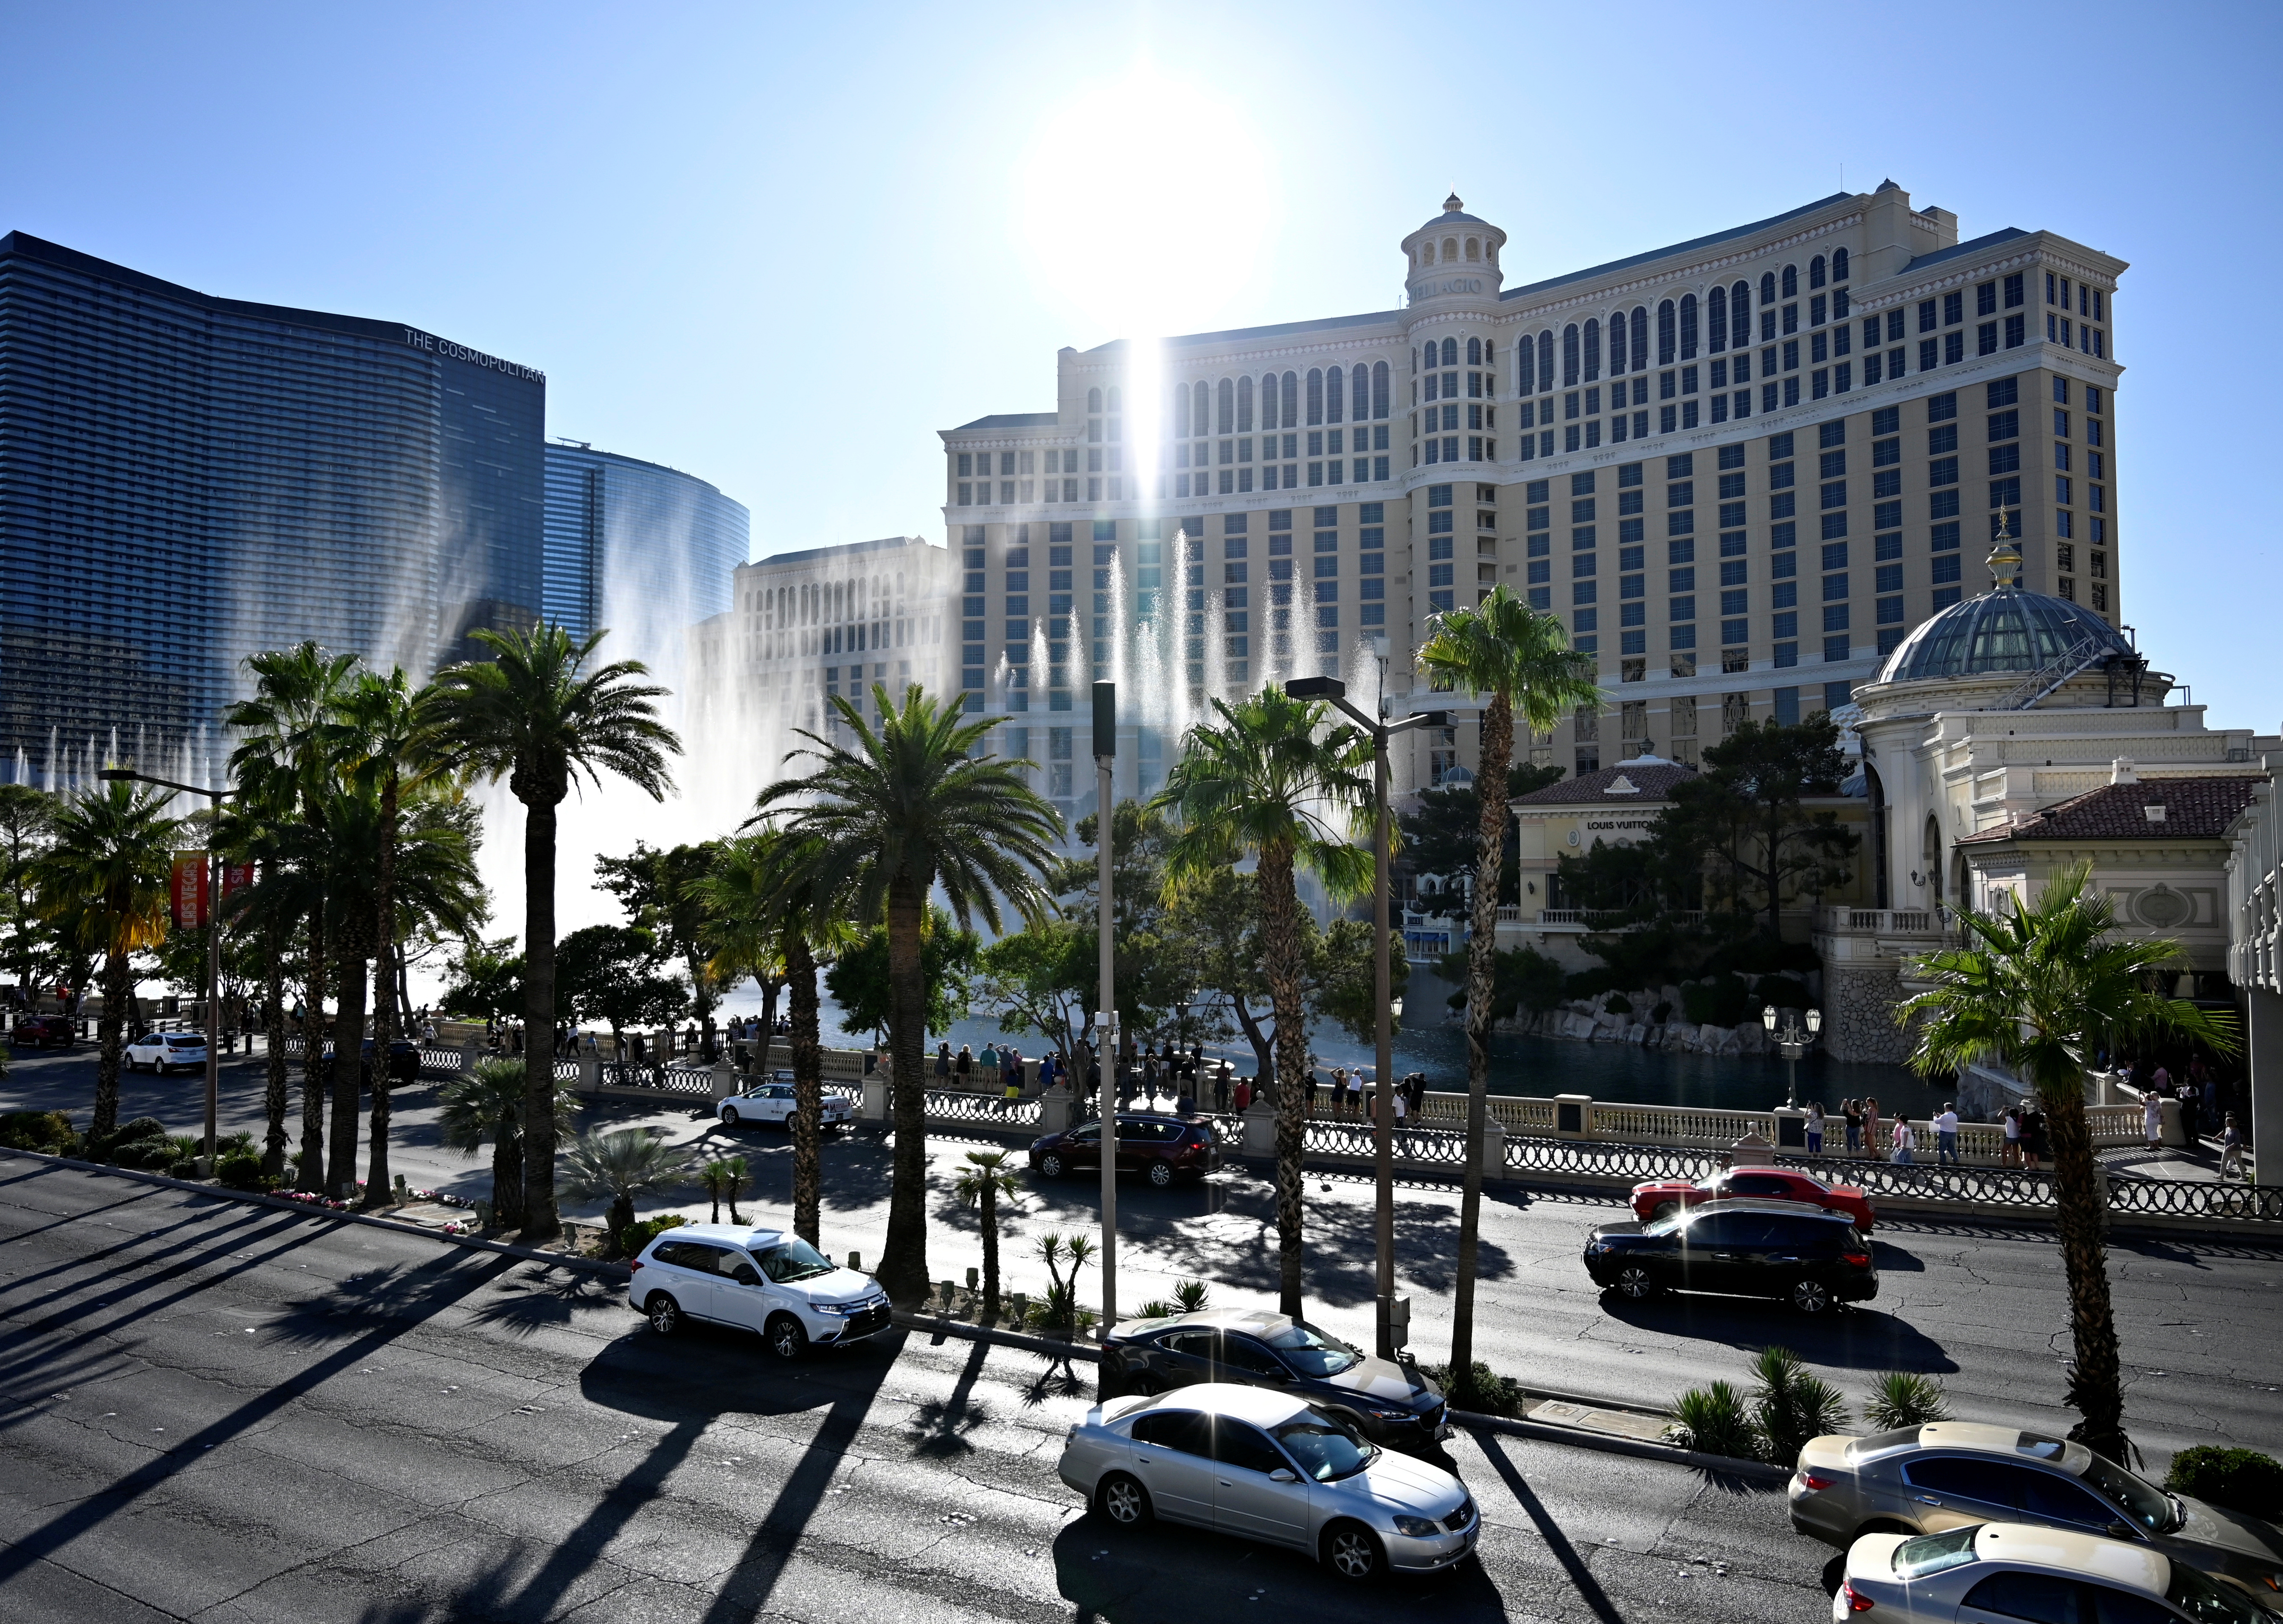 Marriott enters licensing deal with MGM to boost presence in Las Vegas strip